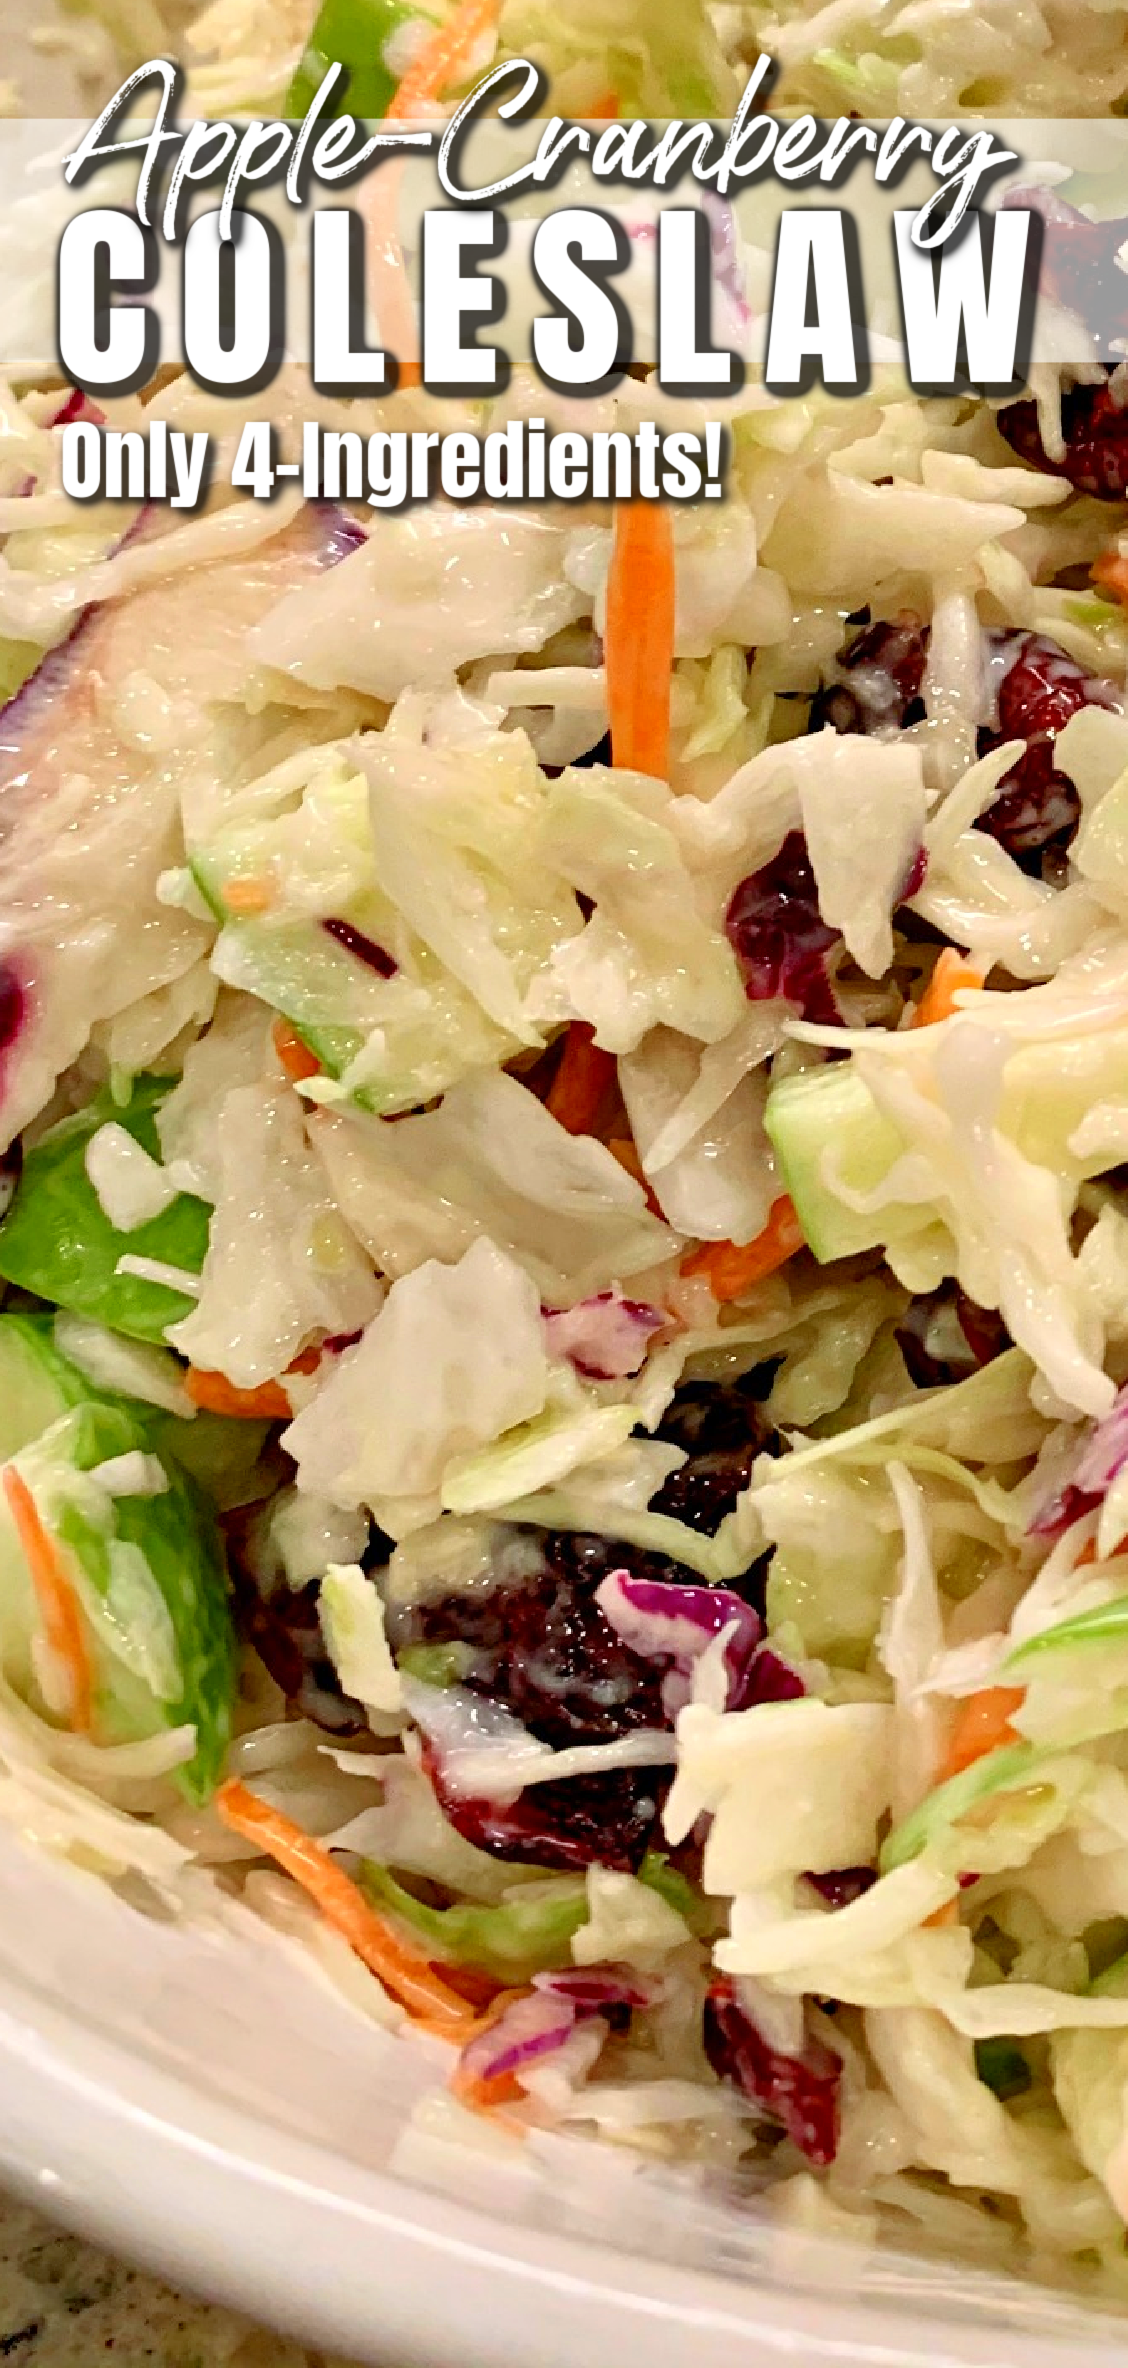 This photo shows apple-cranberry coleslaw in a white bowl. 